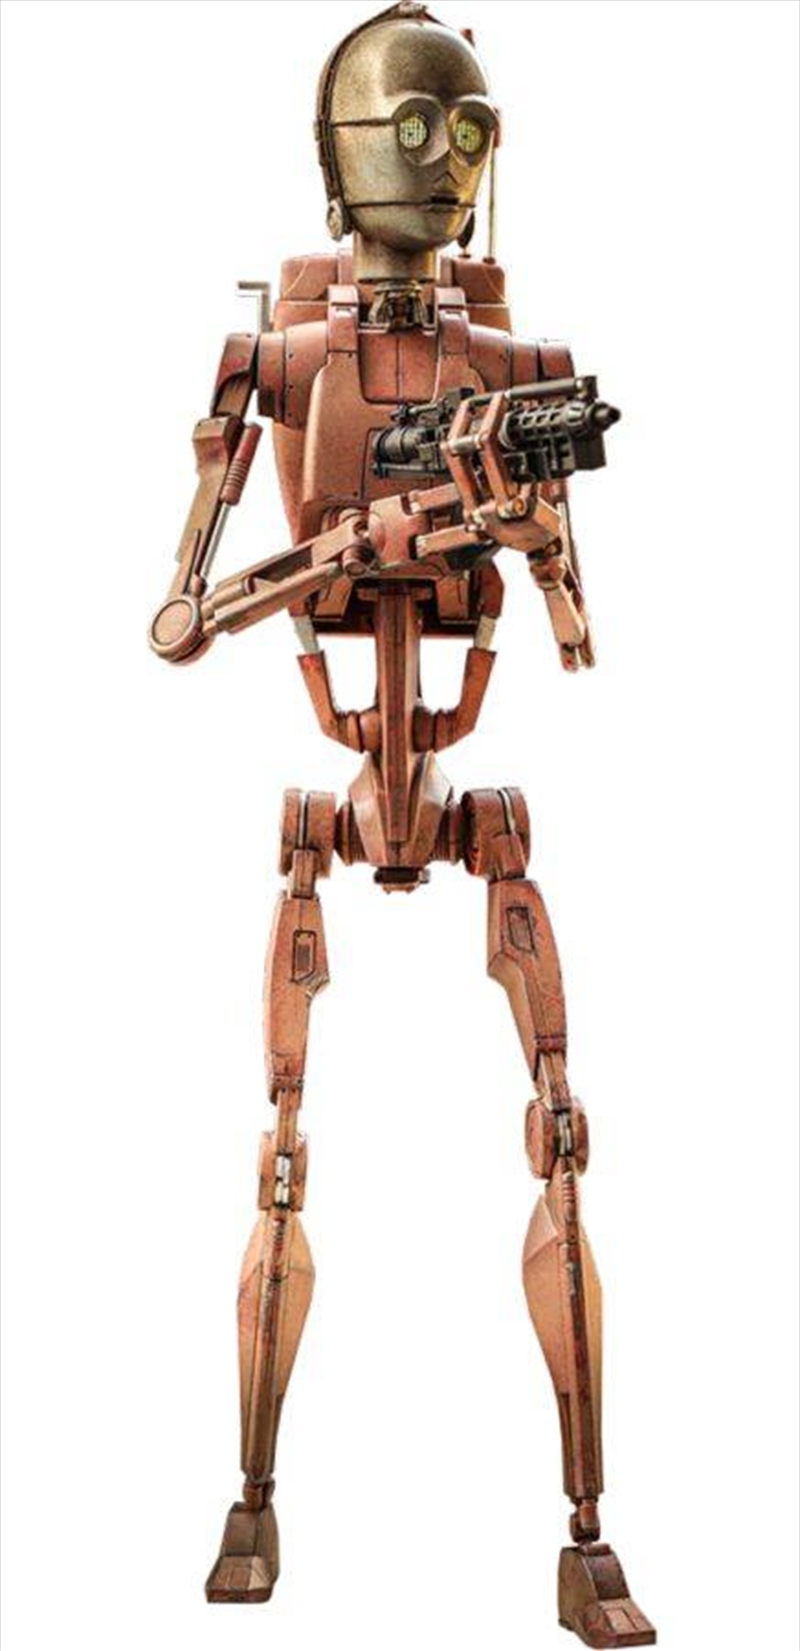 Star Wars - Battle Droid (Geonosis) Attack of the Clones 1:6 Scale 12" Action Figure | Merchandise